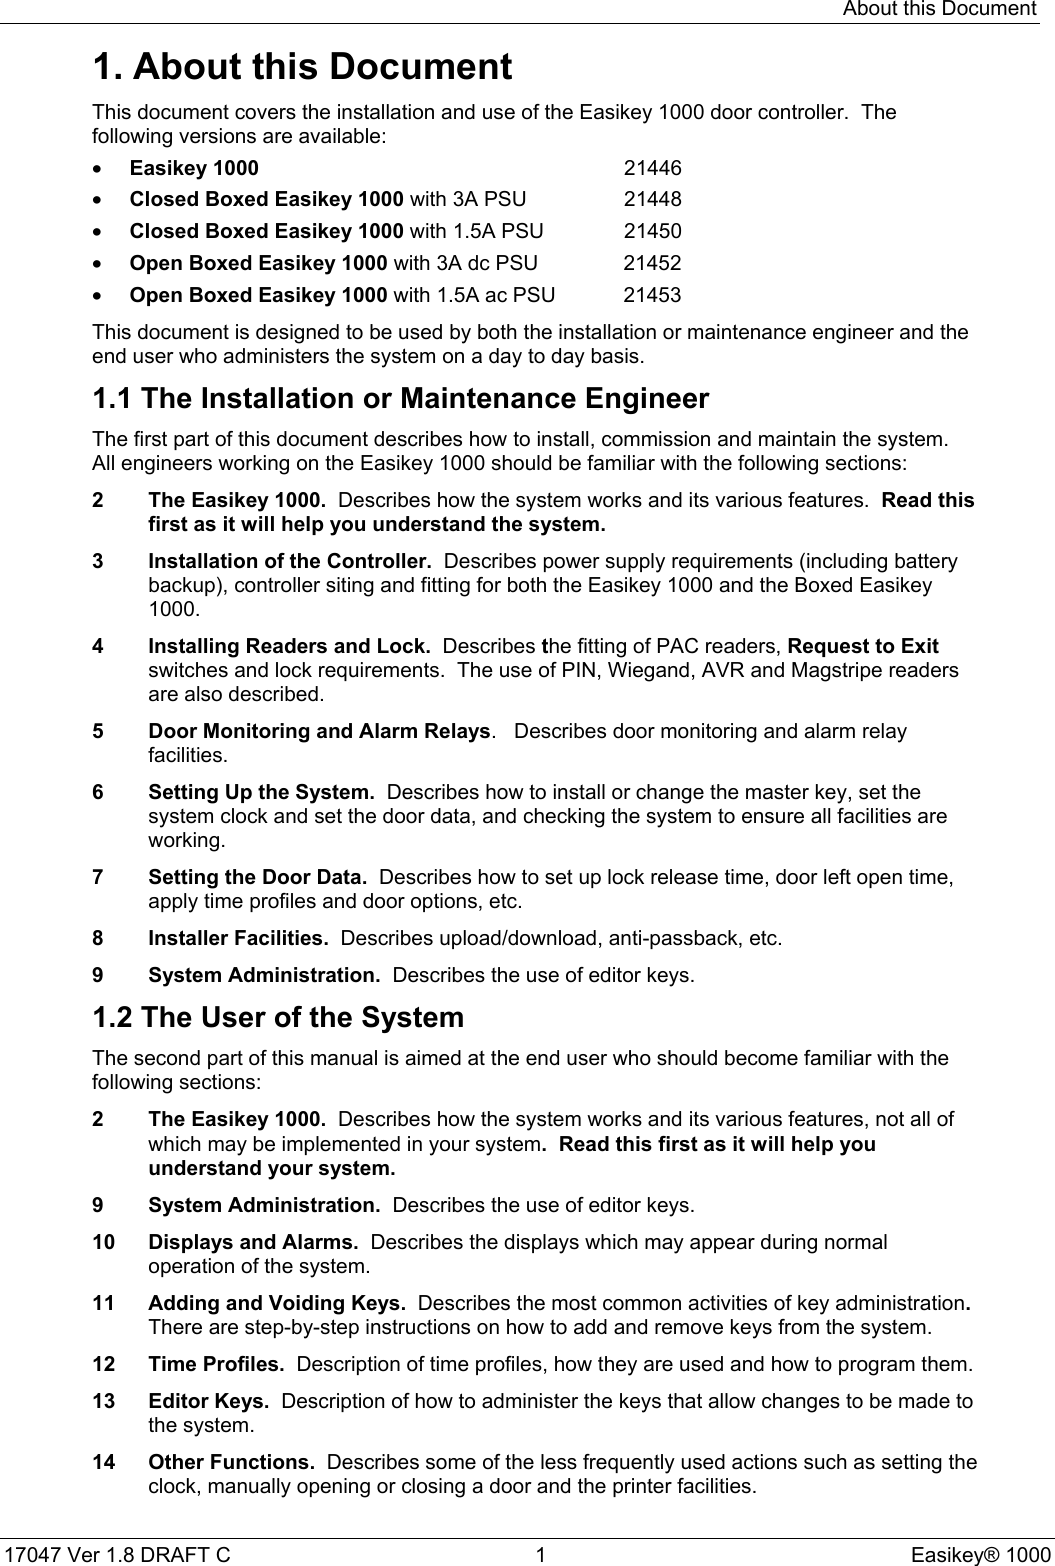 About this Document17047 Ver 1.8 DRAFT C  1 Easikey® 10001. About this DocumentThis document covers the installation and use of the Easikey 1000 door controller.  Thefollowing versions are available:• Easikey 1000 21446• Closed Boxed Easikey 1000 with 3A PSU 21448• Closed Boxed Easikey 1000 with 1.5A PSU 21450• Open Boxed Easikey 1000 with 3A dc PSU 21452• Open Boxed Easikey 1000 with 1.5A ac PSU 21453This document is designed to be used by both the installation or maintenance engineer and theend user who administers the system on a day to day basis.1.1 The Installation or Maintenance EngineerThe first part of this document describes how to install, commission and maintain the system.All engineers working on the Easikey 1000 should be familiar with the following sections:2 The Easikey 1000.  Describes how the system works and its various features.  Read thisfirst as it will help you understand the system.3 Installation of the Controller.  Describes power supply requirements (including batterybackup), controller siting and fitting for both the Easikey 1000 and the Boxed Easikey1000.4 Installing Readers and Lock.  Describes the fitting of PAC readers, Request to Exitswitches and lock requirements.  The use of PIN, Wiegand, AVR and Magstripe readersare also described.5 Door Monitoring and Alarm Relays.   Describes door monitoring and alarm relayfacilities.6 Setting Up the System.  Describes how to install or change the master key, set thesystem clock and set the door data, and checking the system to ensure all facilities areworking.7 Setting the Door Data.  Describes how to set up lock release time, door left open time,apply time profiles and door options, etc.8 Installer Facilities.  Describes upload/download, anti-passback, etc.9 System Administration.  Describes the use of editor keys.1.2 The User of the SystemThe second part of this manual is aimed at the end user who should become familiar with thefollowing sections:2 The Easikey 1000.  Describes how the system works and its various features, not all ofwhich may be implemented in your system.  Read this first as it will help youunderstand your system.9 System Administration.  Describes the use of editor keys.10 Displays and Alarms.  Describes the displays which may appear during normaloperation of the system.11 Adding and Voiding Keys.  Describes the most common activities of key administration.There are step-by-step instructions on how to add and remove keys from the system.12 Time Profiles.  Description of time profiles, how they are used and how to program them.13 Editor Keys.  Description of how to administer the keys that allow changes to be made tothe system.14 Other Functions.  Describes some of the less frequently used actions such as setting theclock, manually opening or closing a door and the printer facilities.